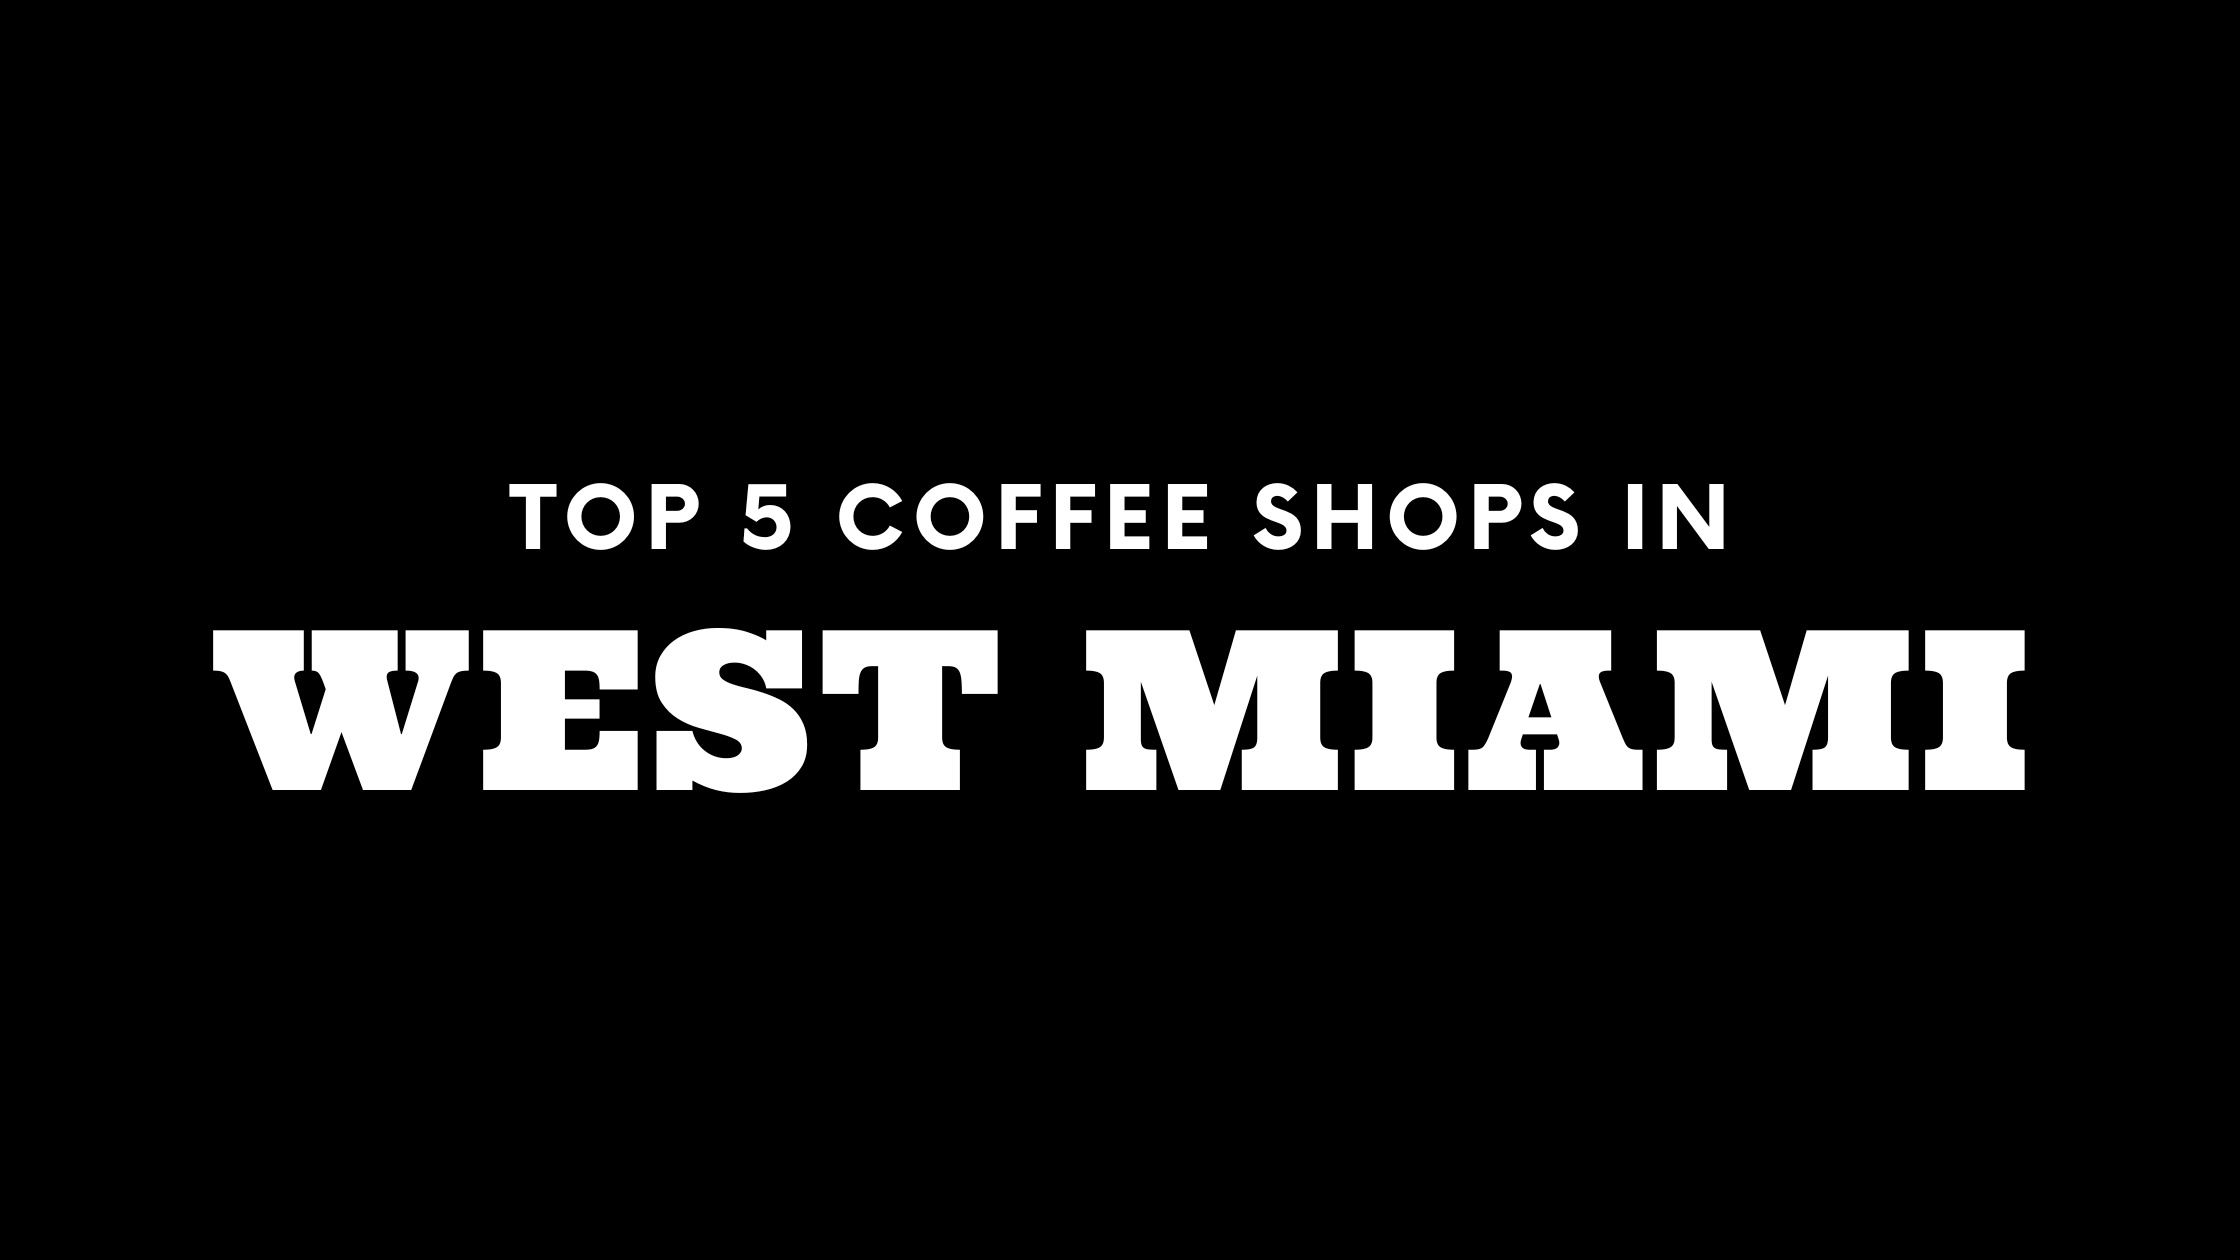 Top 5 Coffee Shops in West Miami